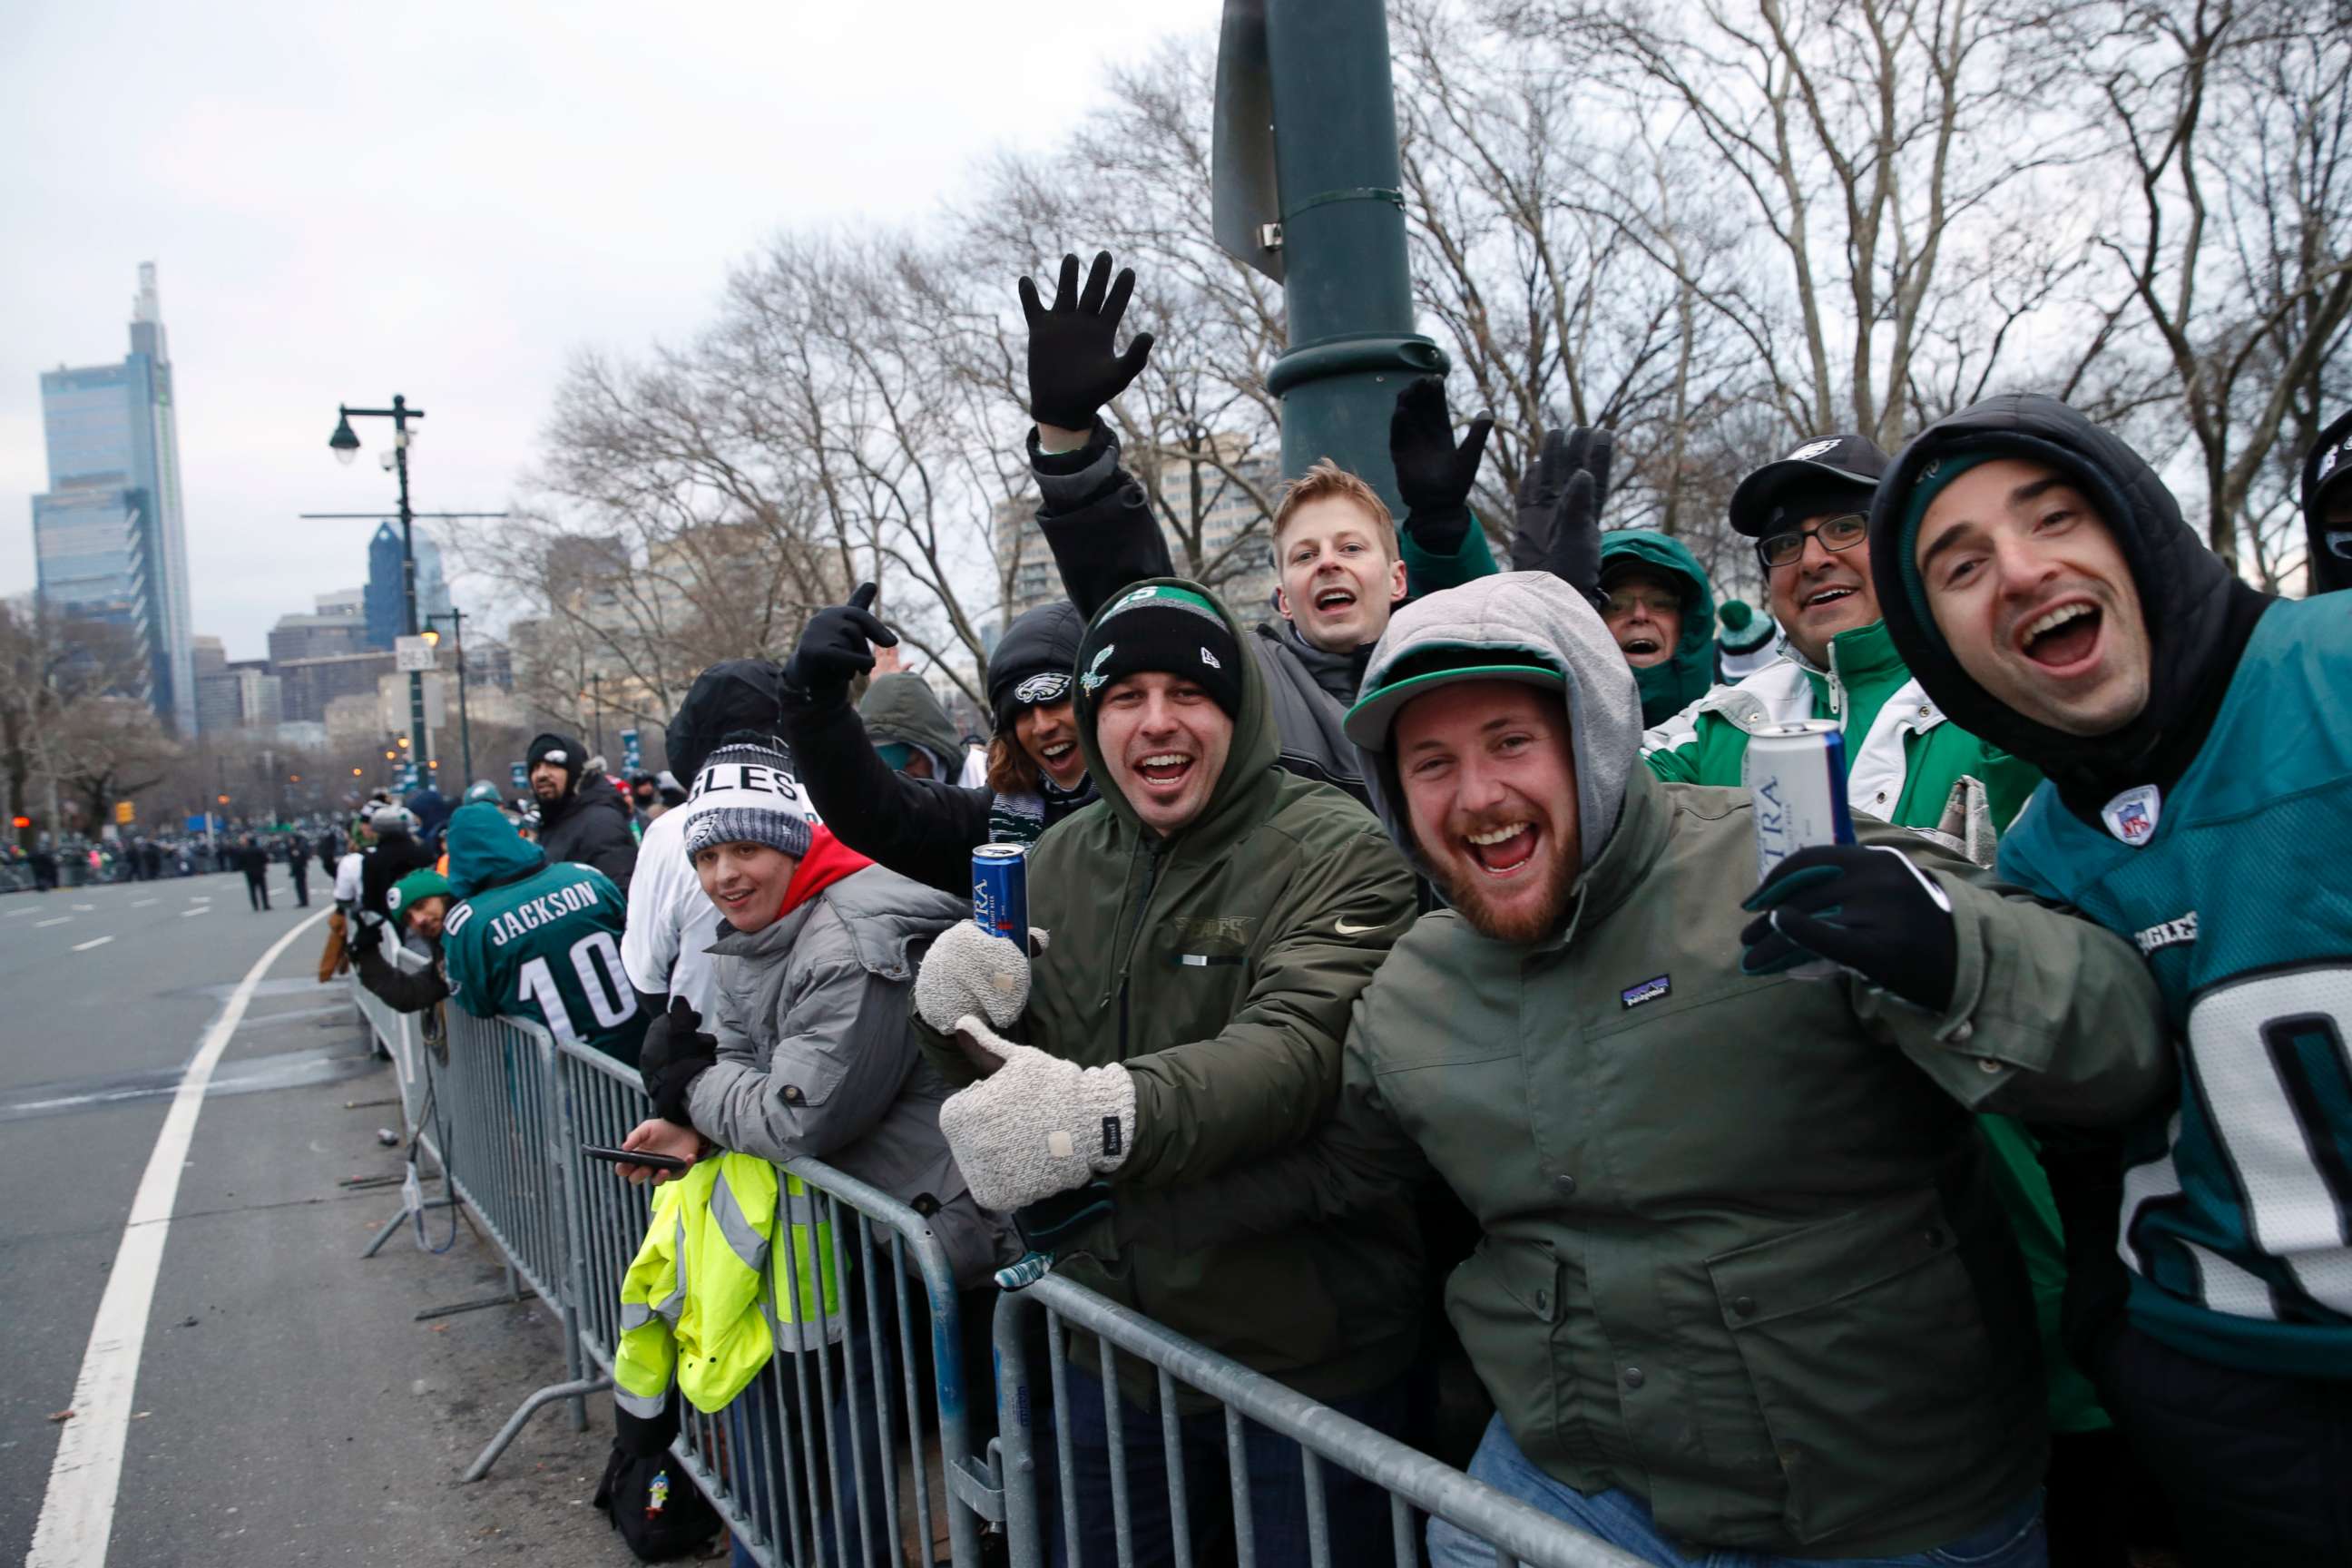 PHOTO: Fans line Benjamin Franklin Parkway before a Super Bowl victory parade for the Philadelphia Eagles NFL football team on Feb. 8, 2018, in Philadelphia.